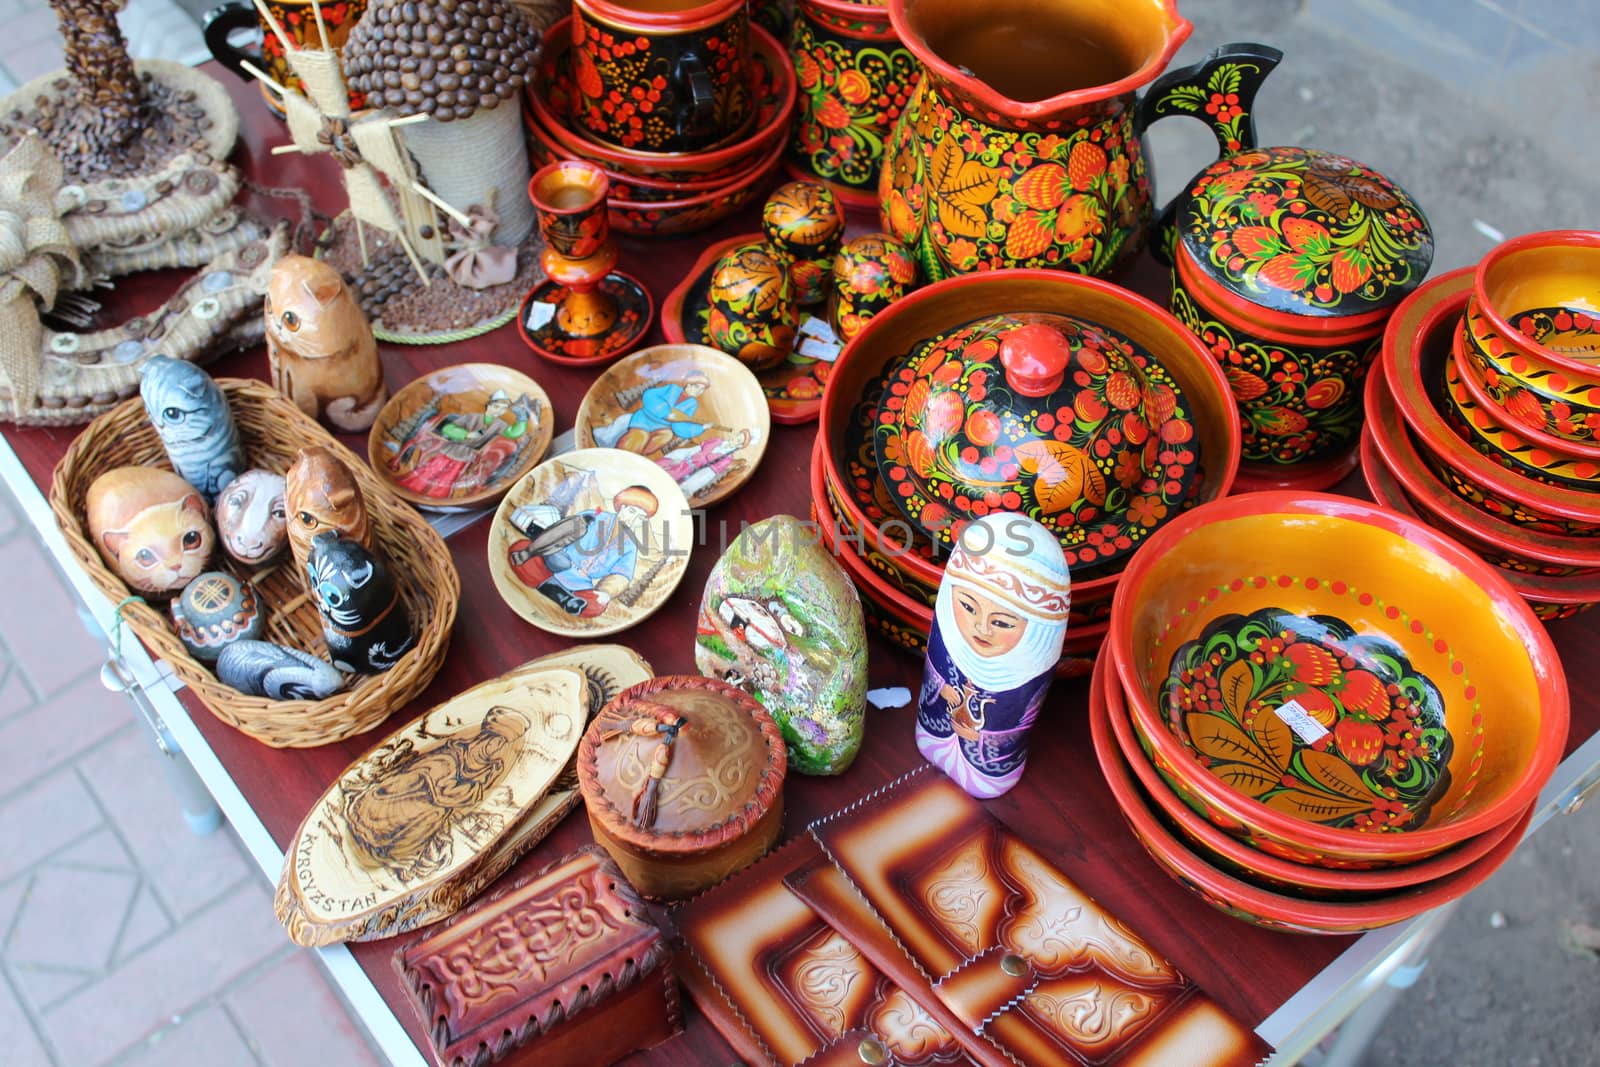 Handmade products on the table by nurjan100